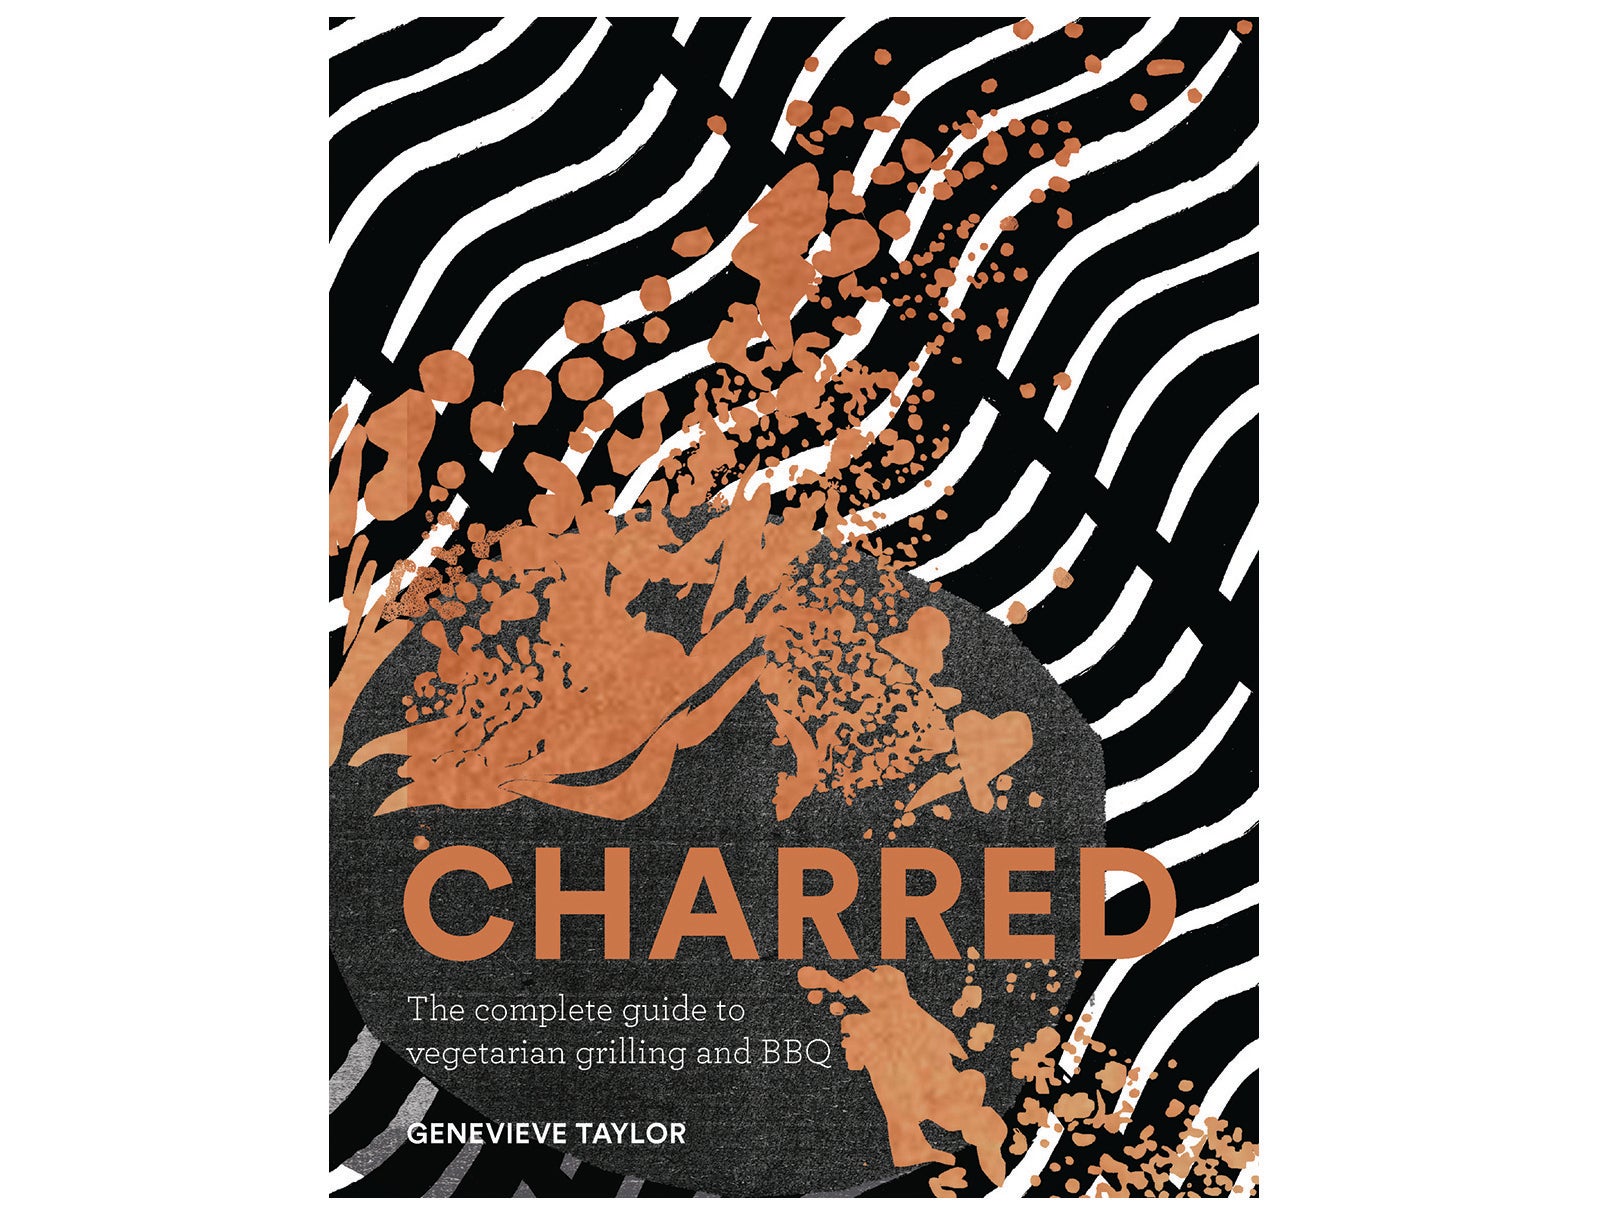  ‘Charred’ by Genevieve Taylor, published by Quadrille.jpg